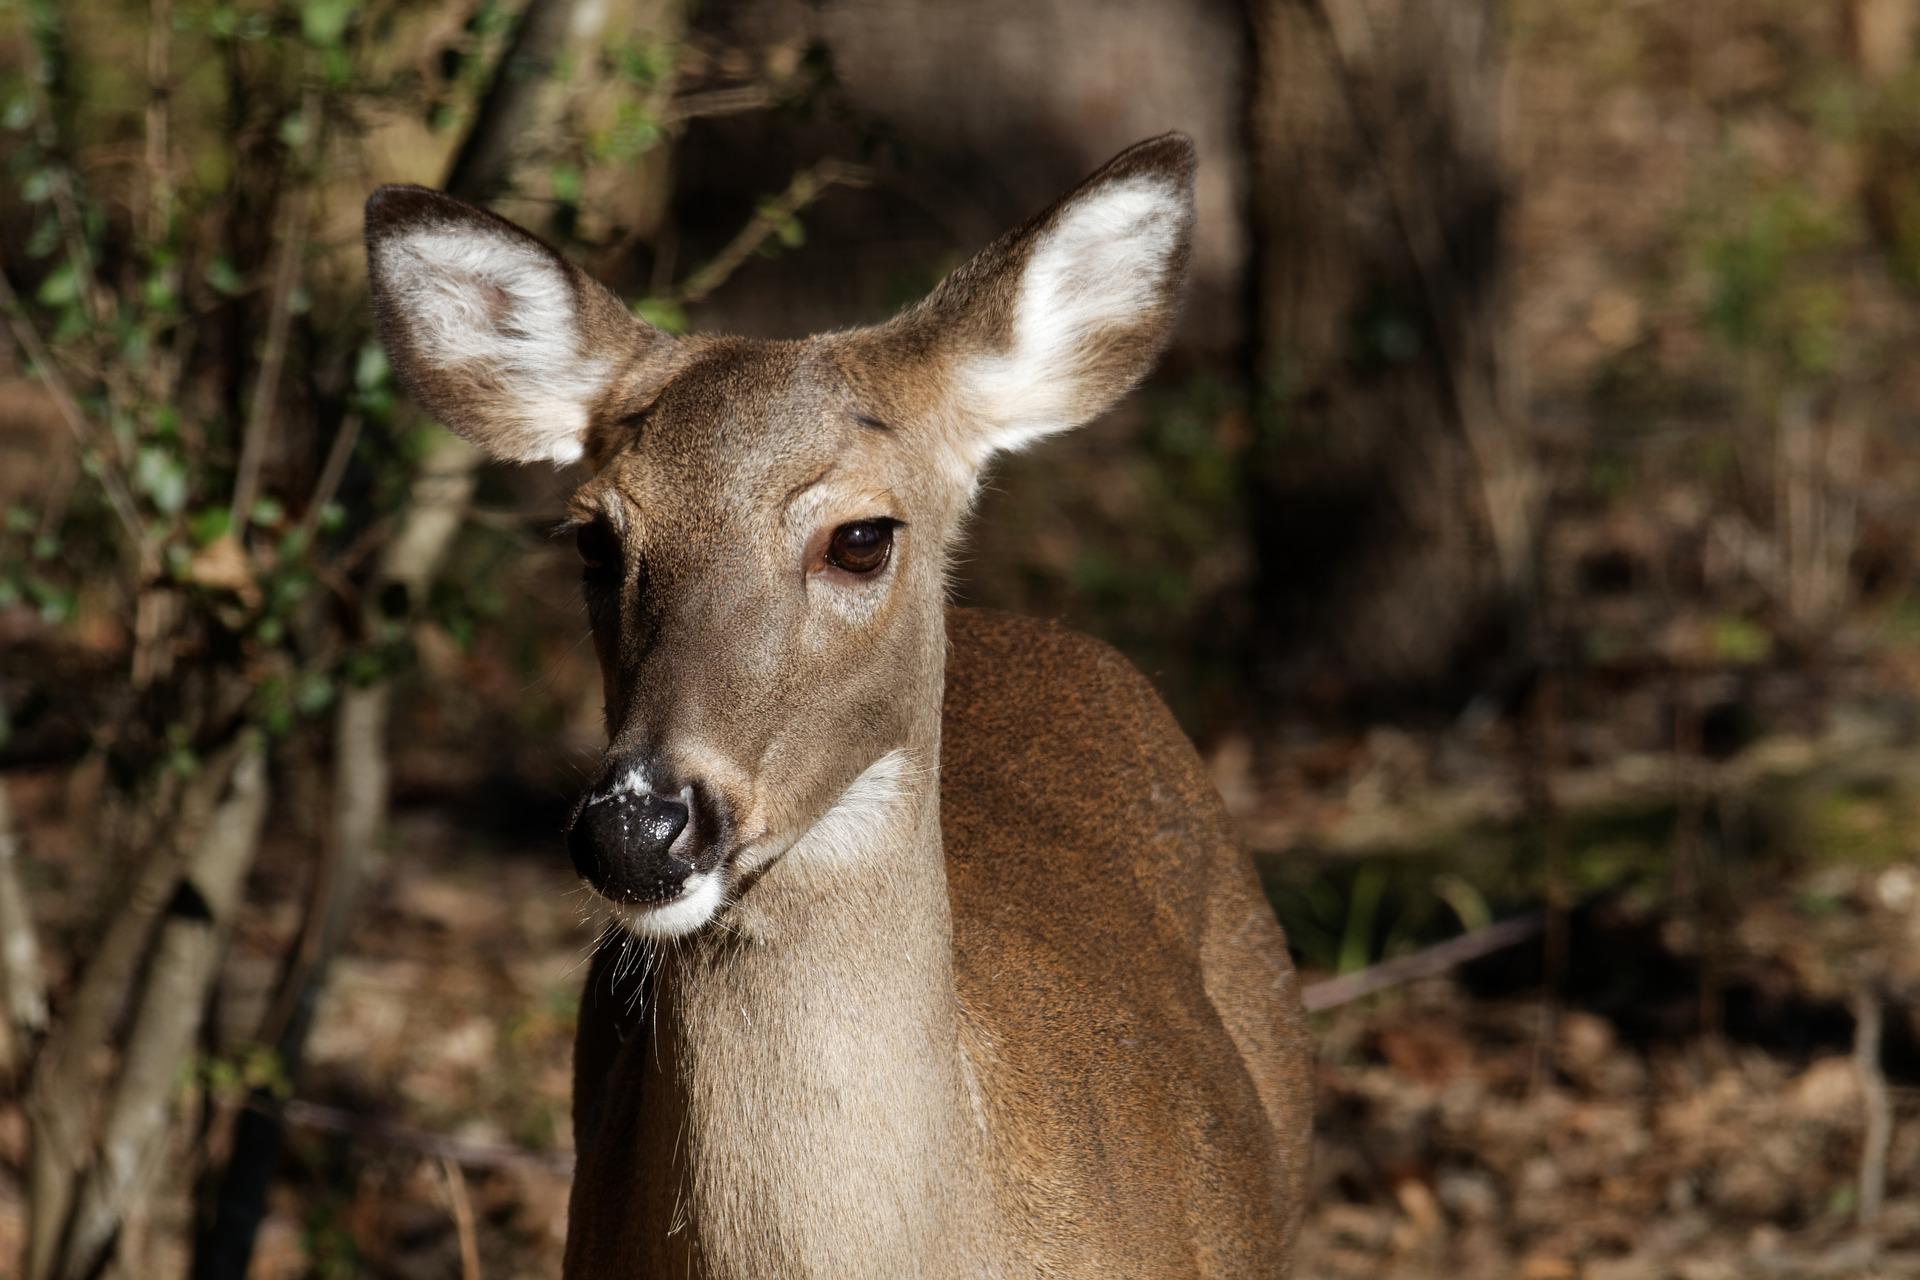 New Jersey Struggles with Whitetail Deer Overpopulation